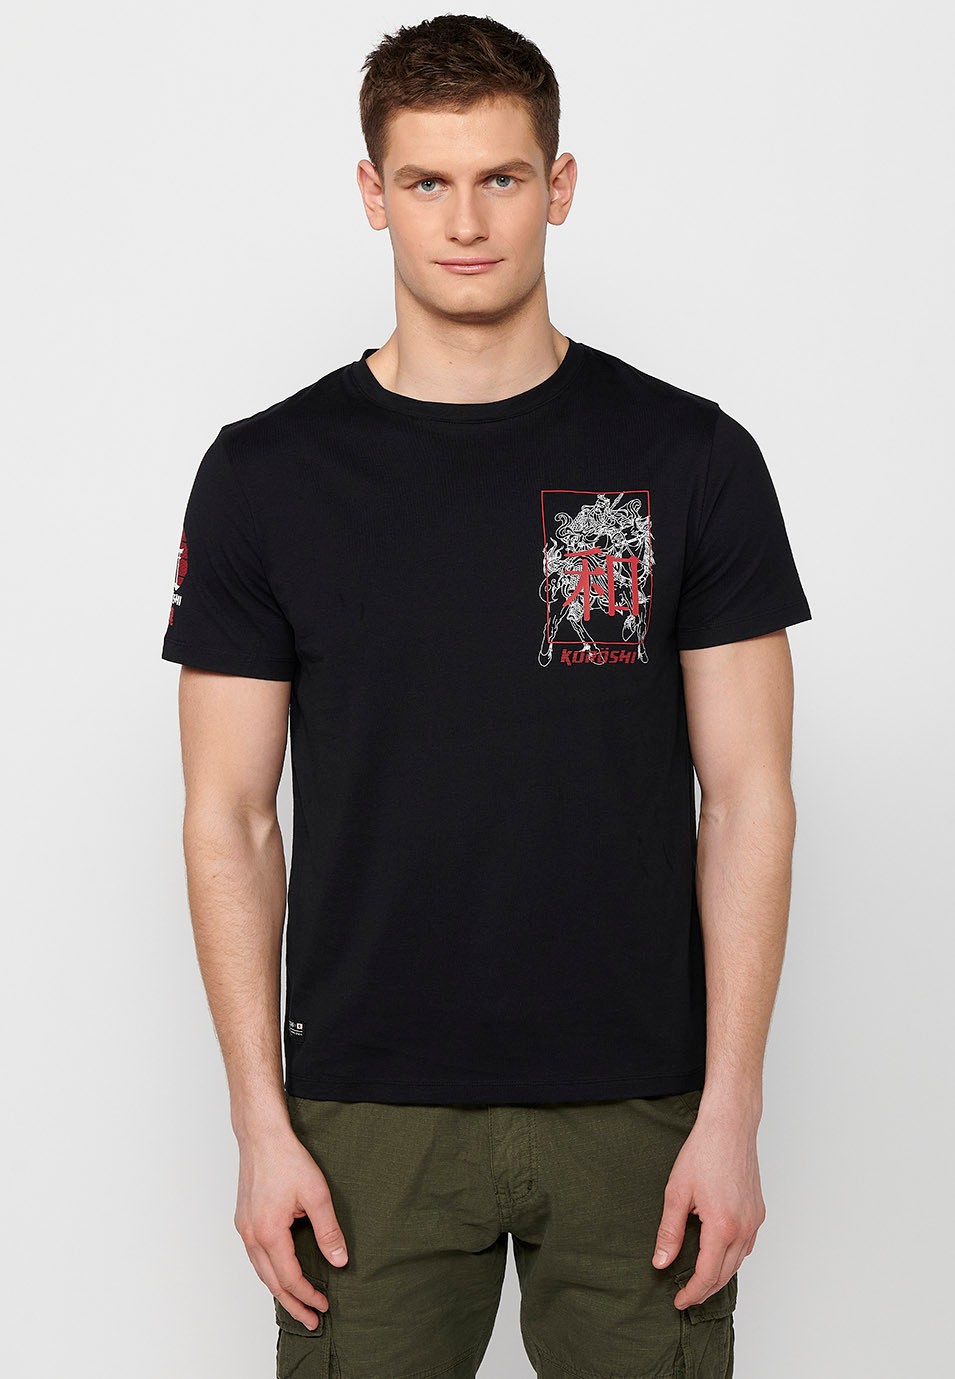 Short sleeve t-shirt with print on the back in black for men